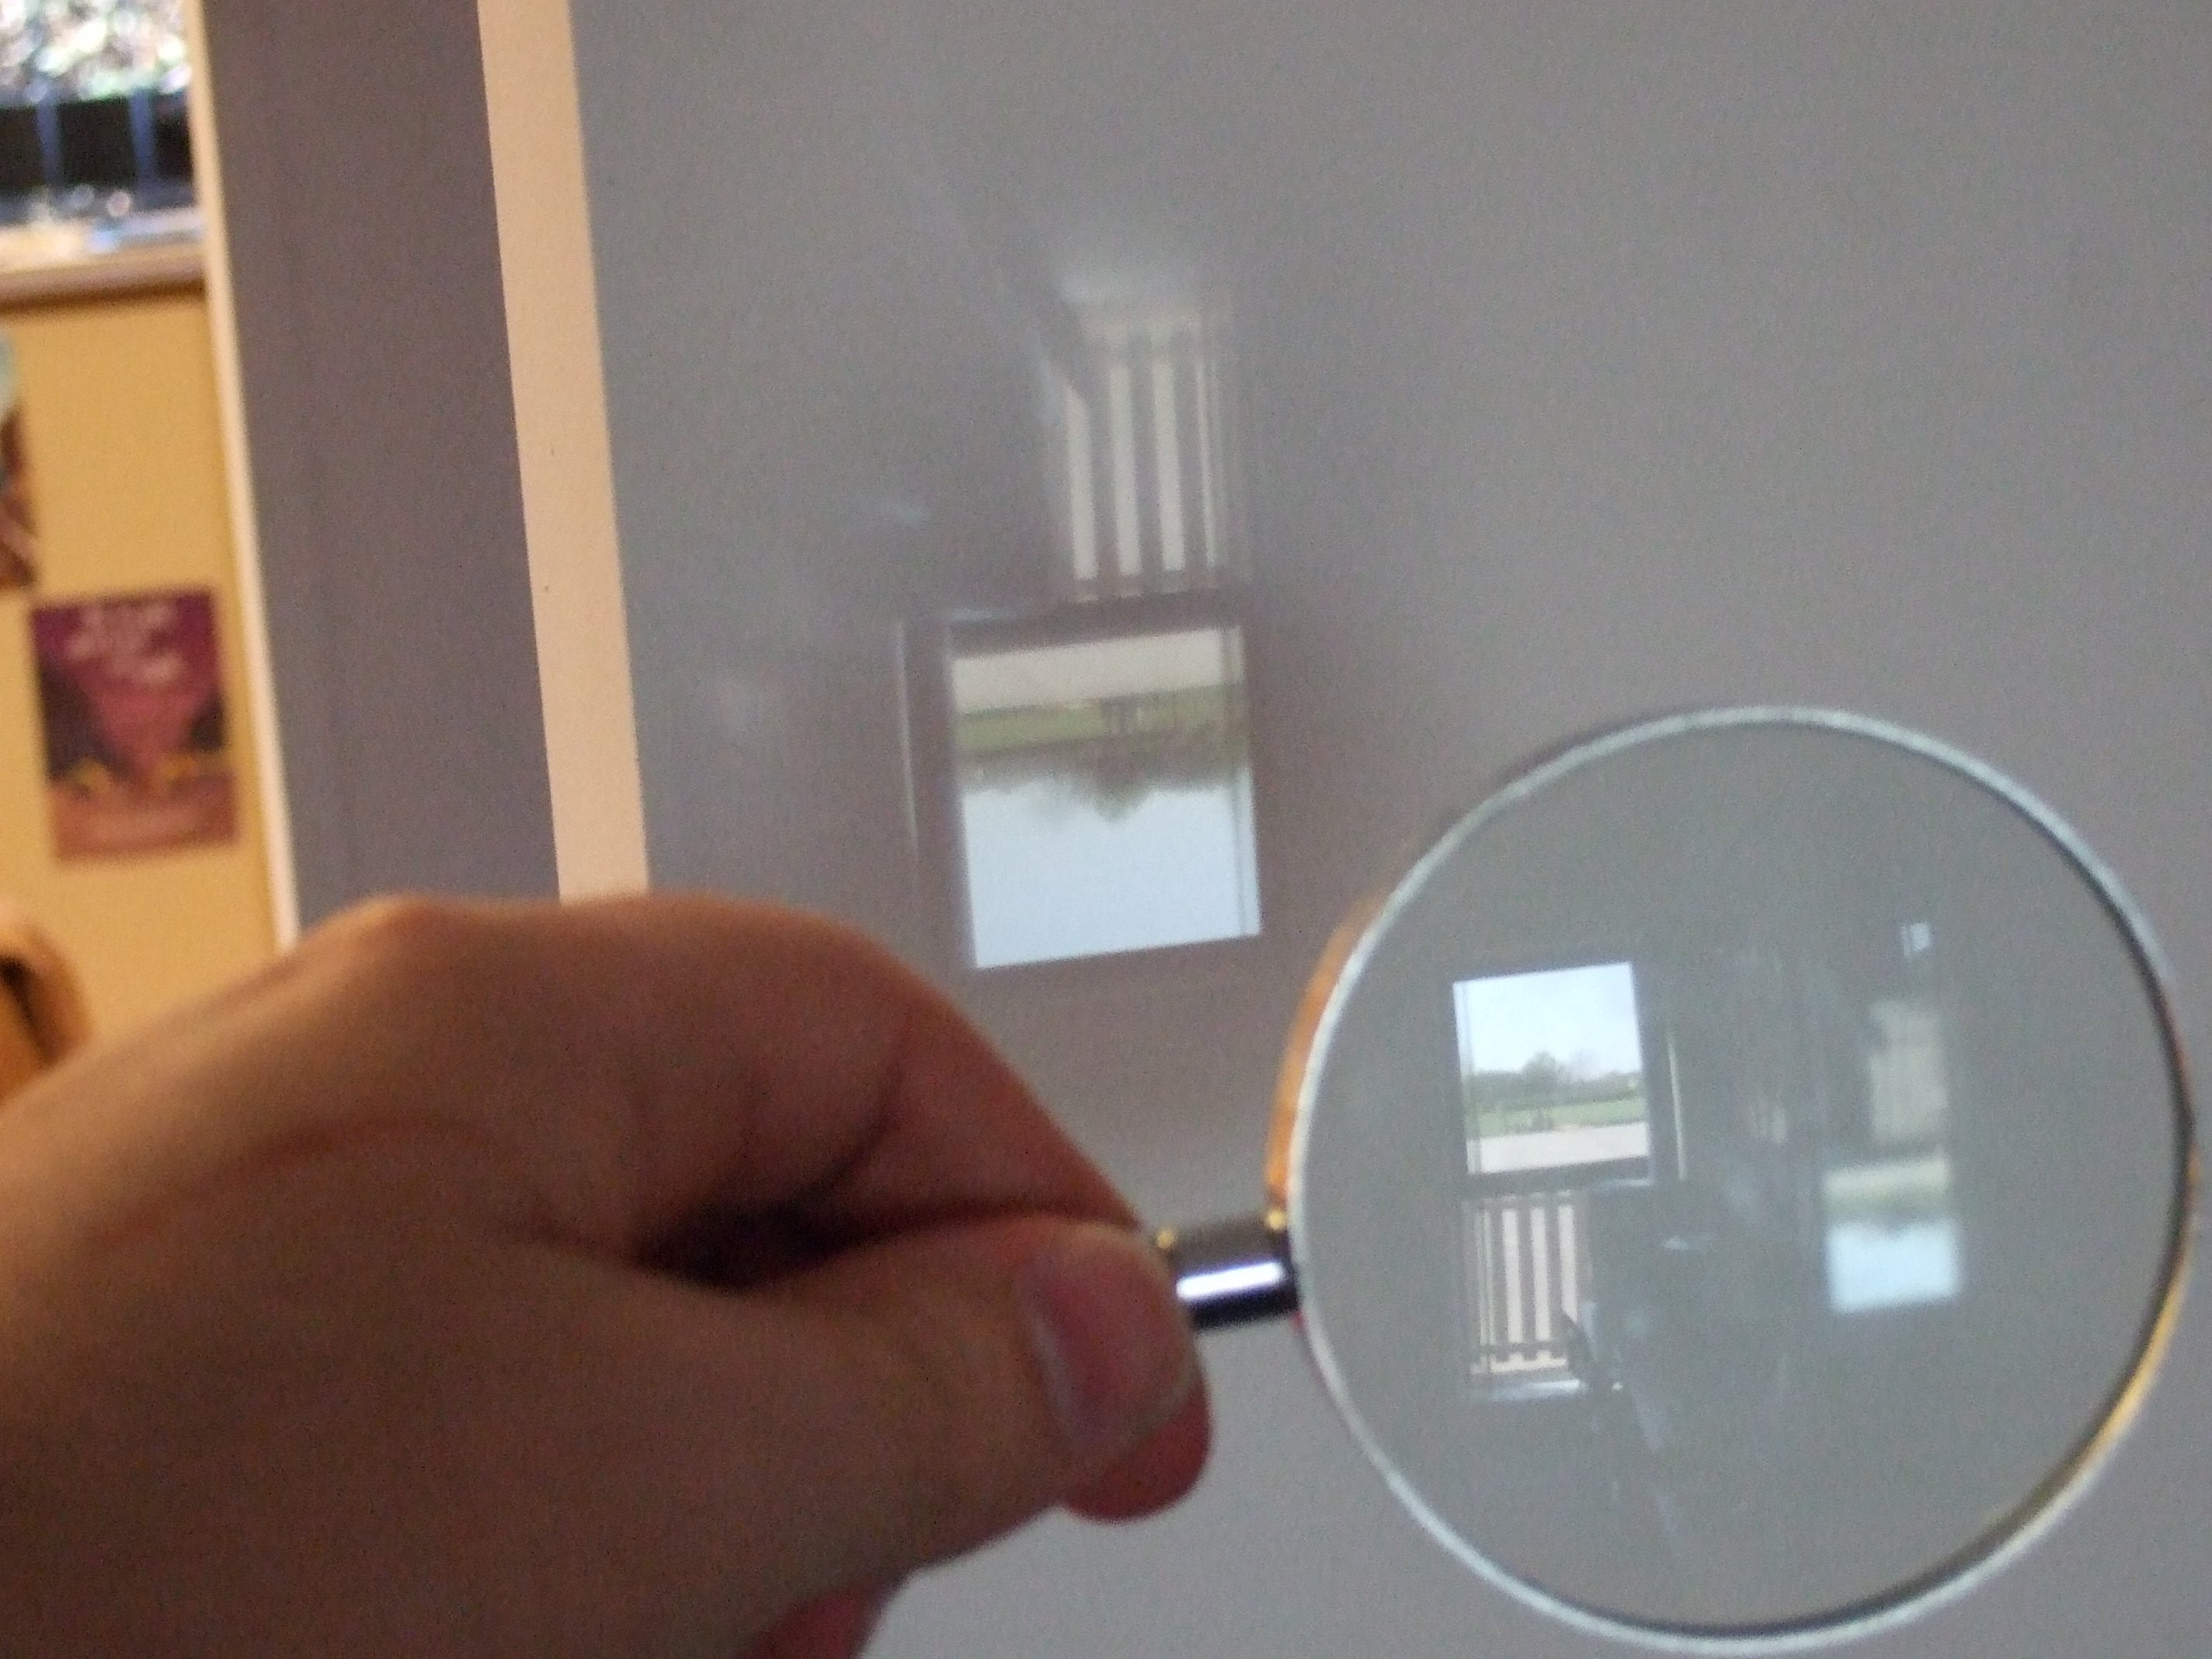 Image from a Magnifying glass